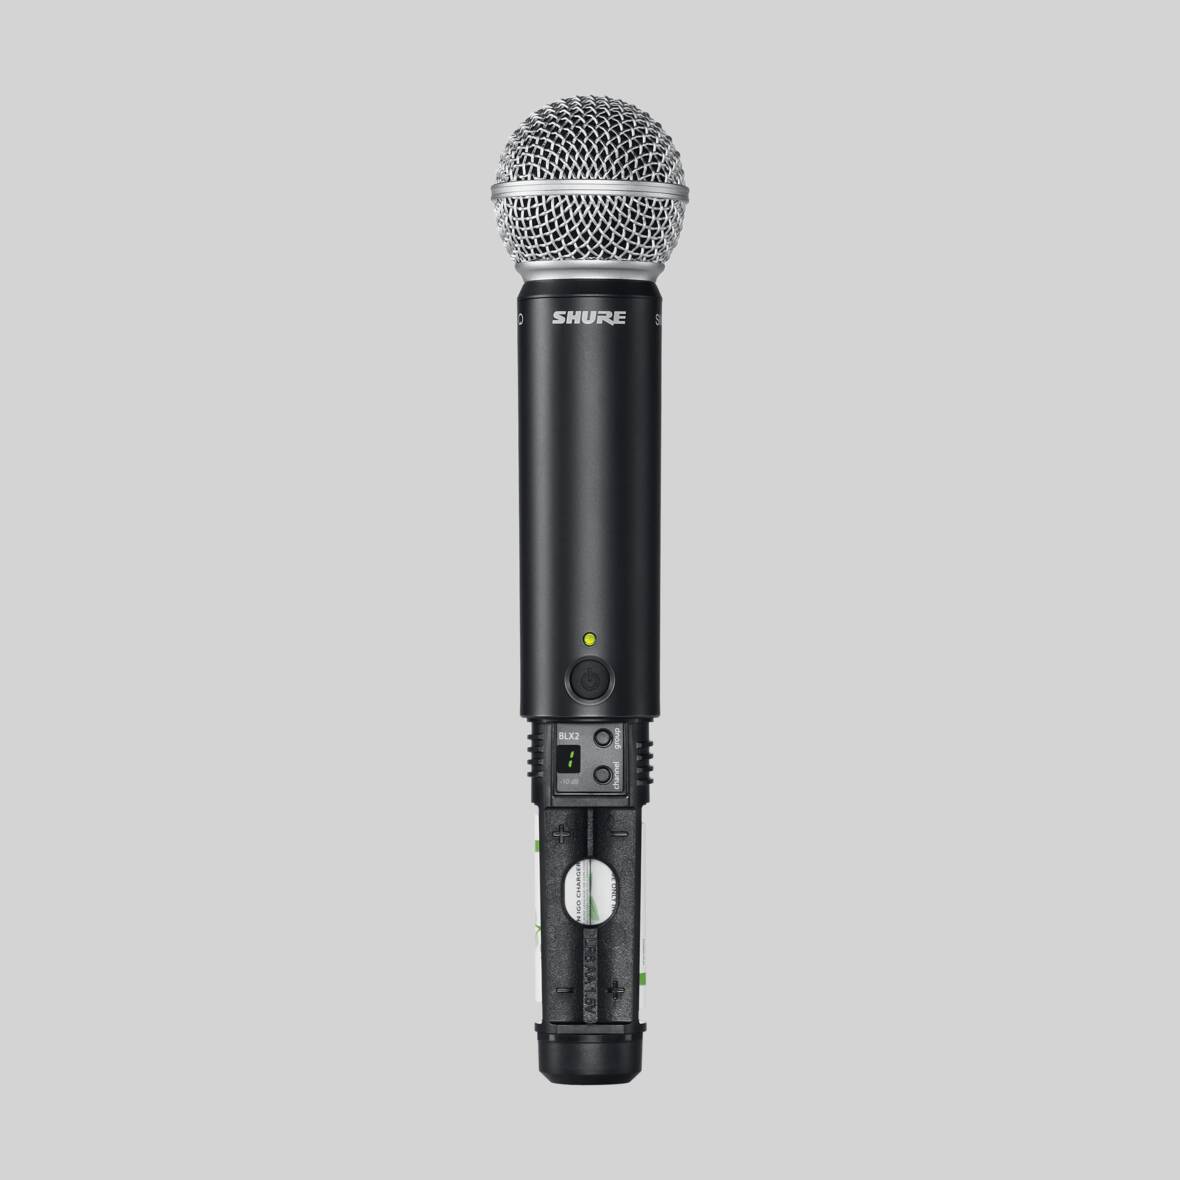 Shure BLX288/SM58 UHF Wireless Microphone System - Perfect for Church,  Karaoke, Vocals - 14-Hour Battery Life, 300 ft Range | Includes (2) SM58